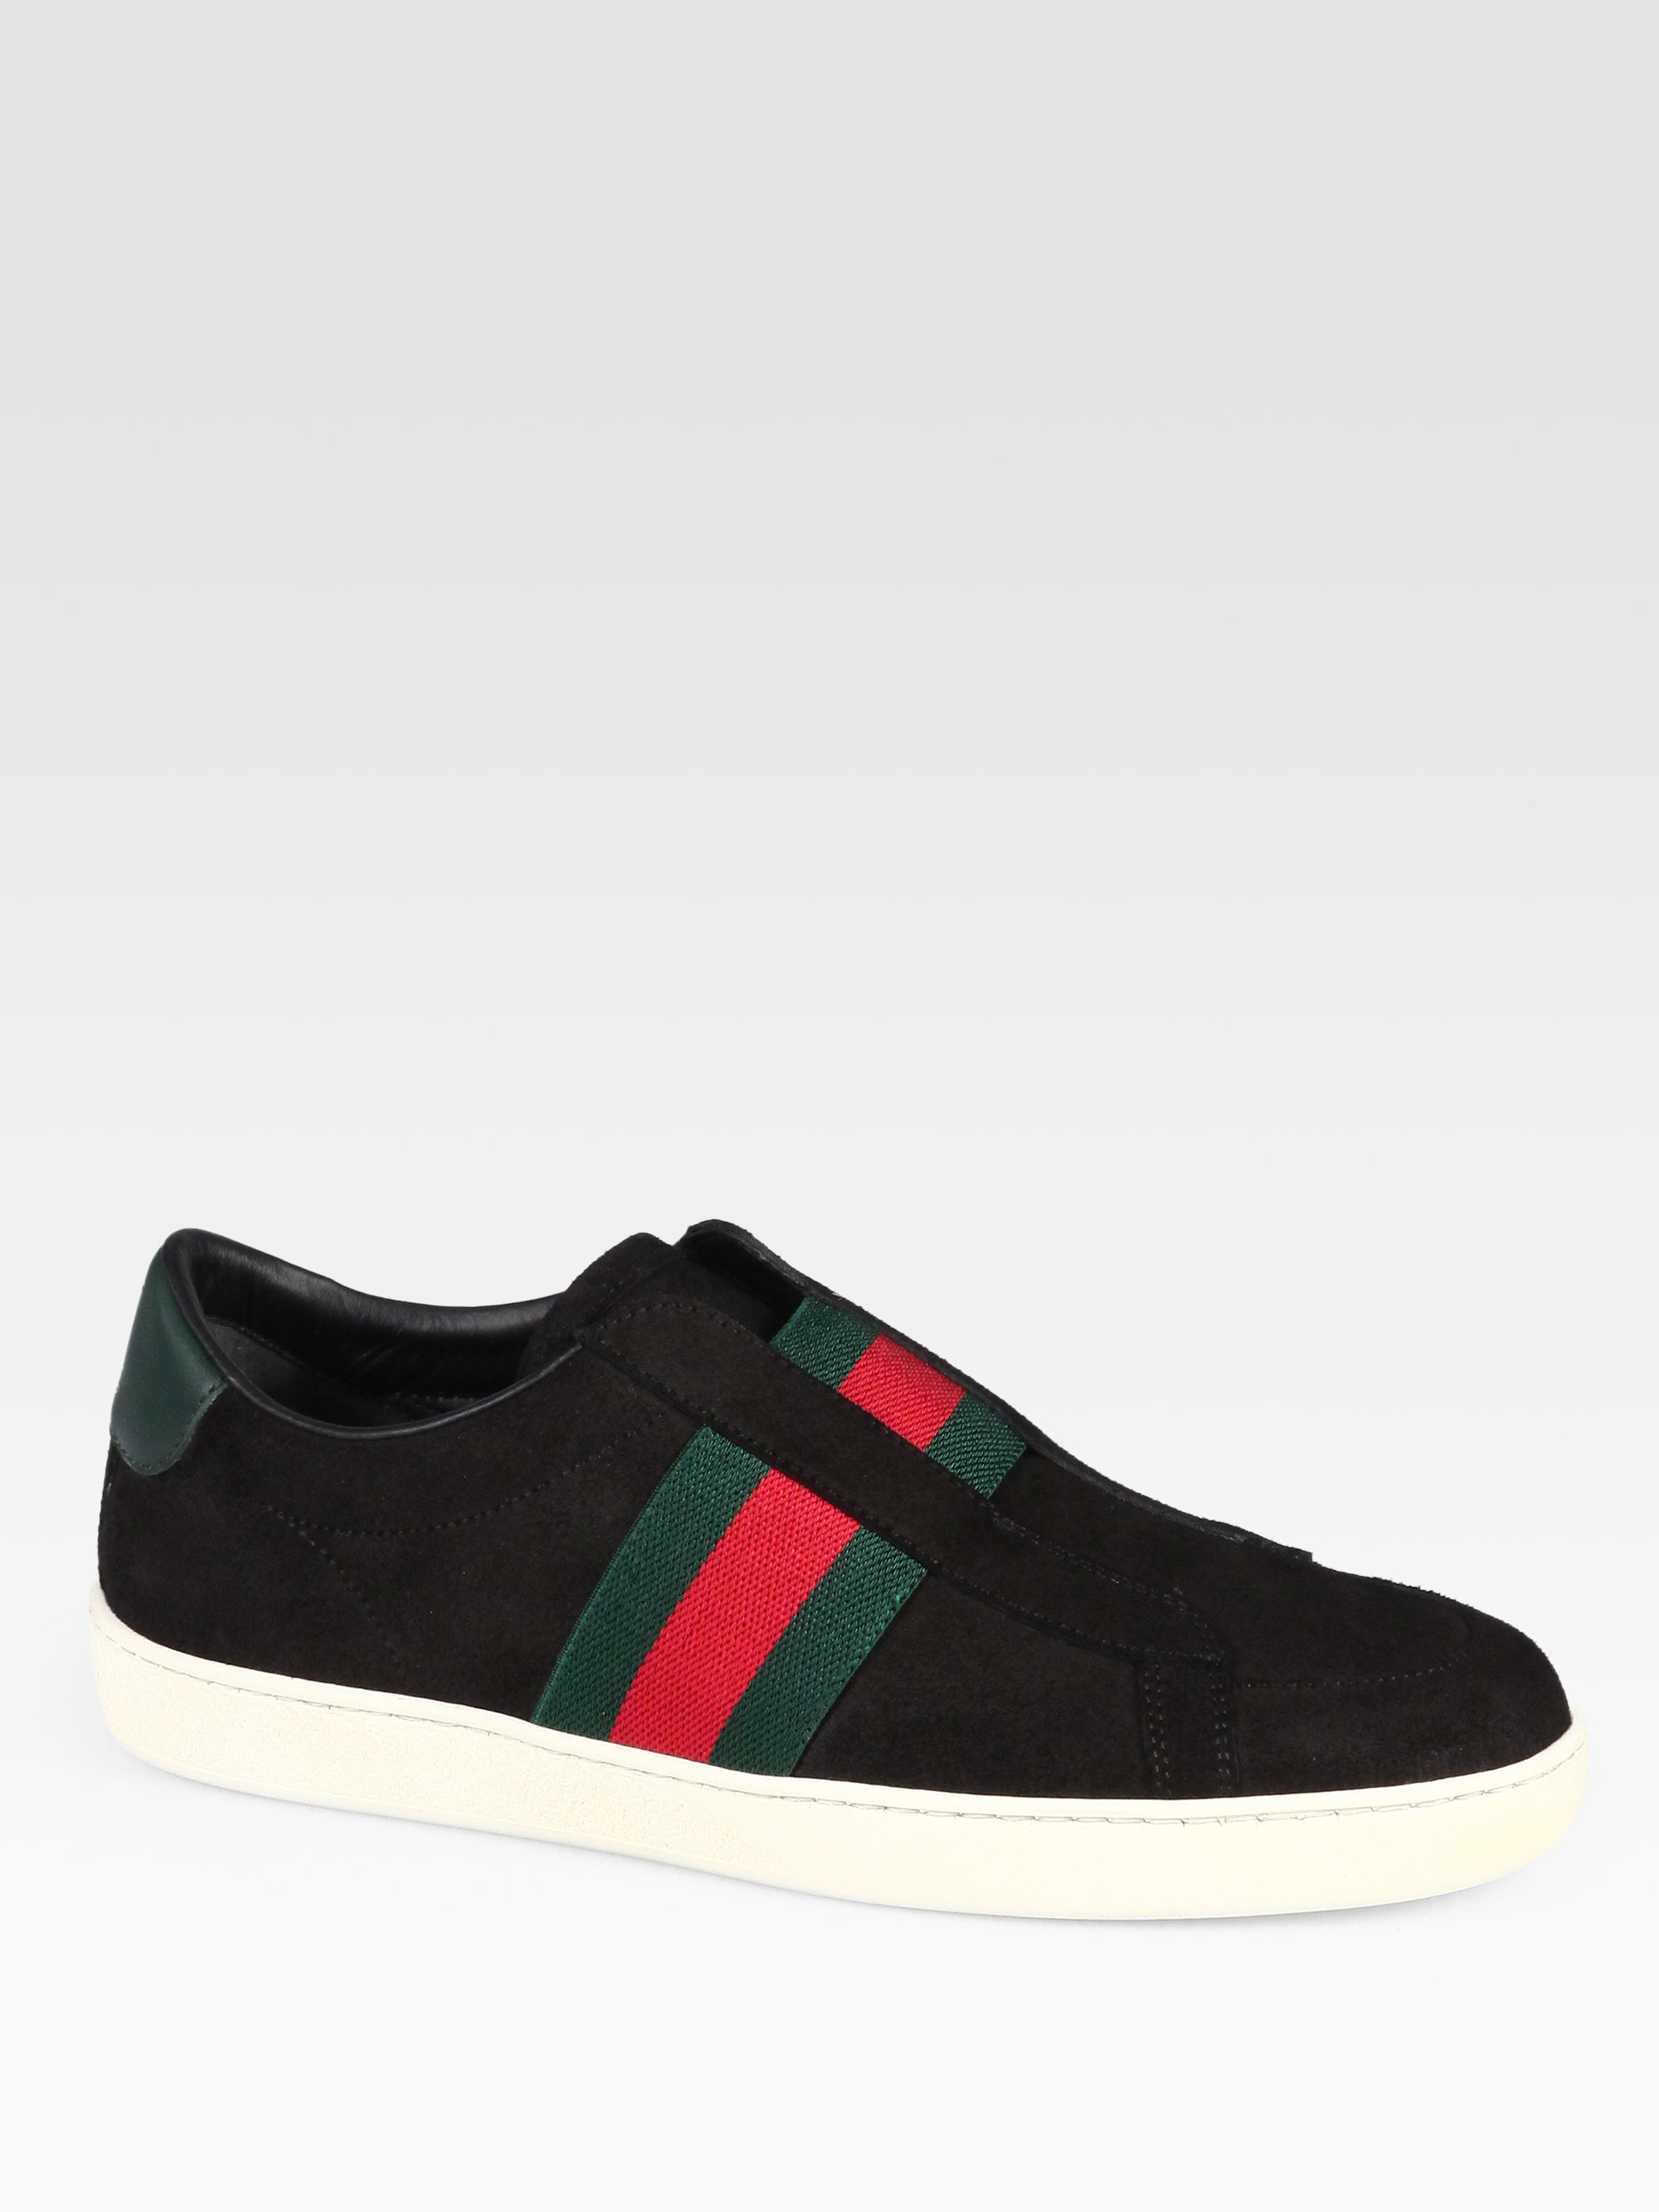 Gucci Laceless Suede Leather Sneakers 